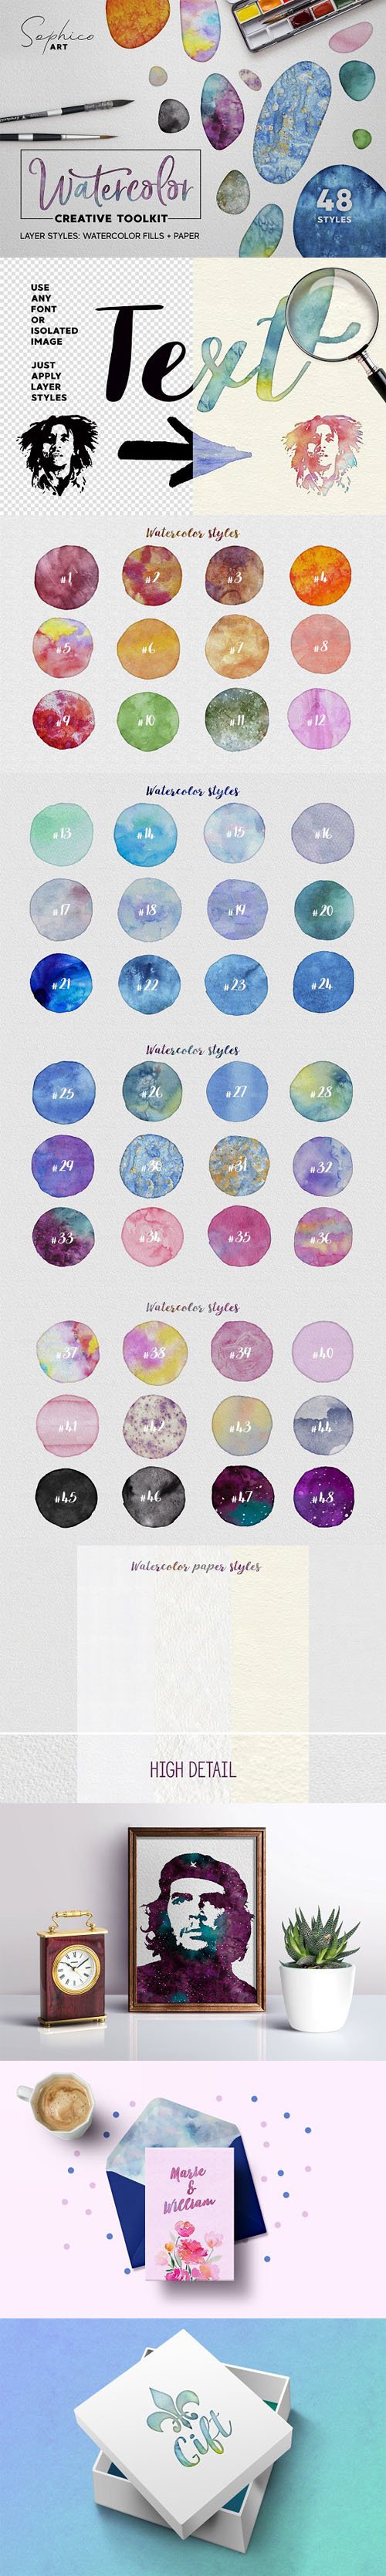 Watercolor Creative Toolkit - 48 Photoshop Layer Styles: Watercolor Files + Paper